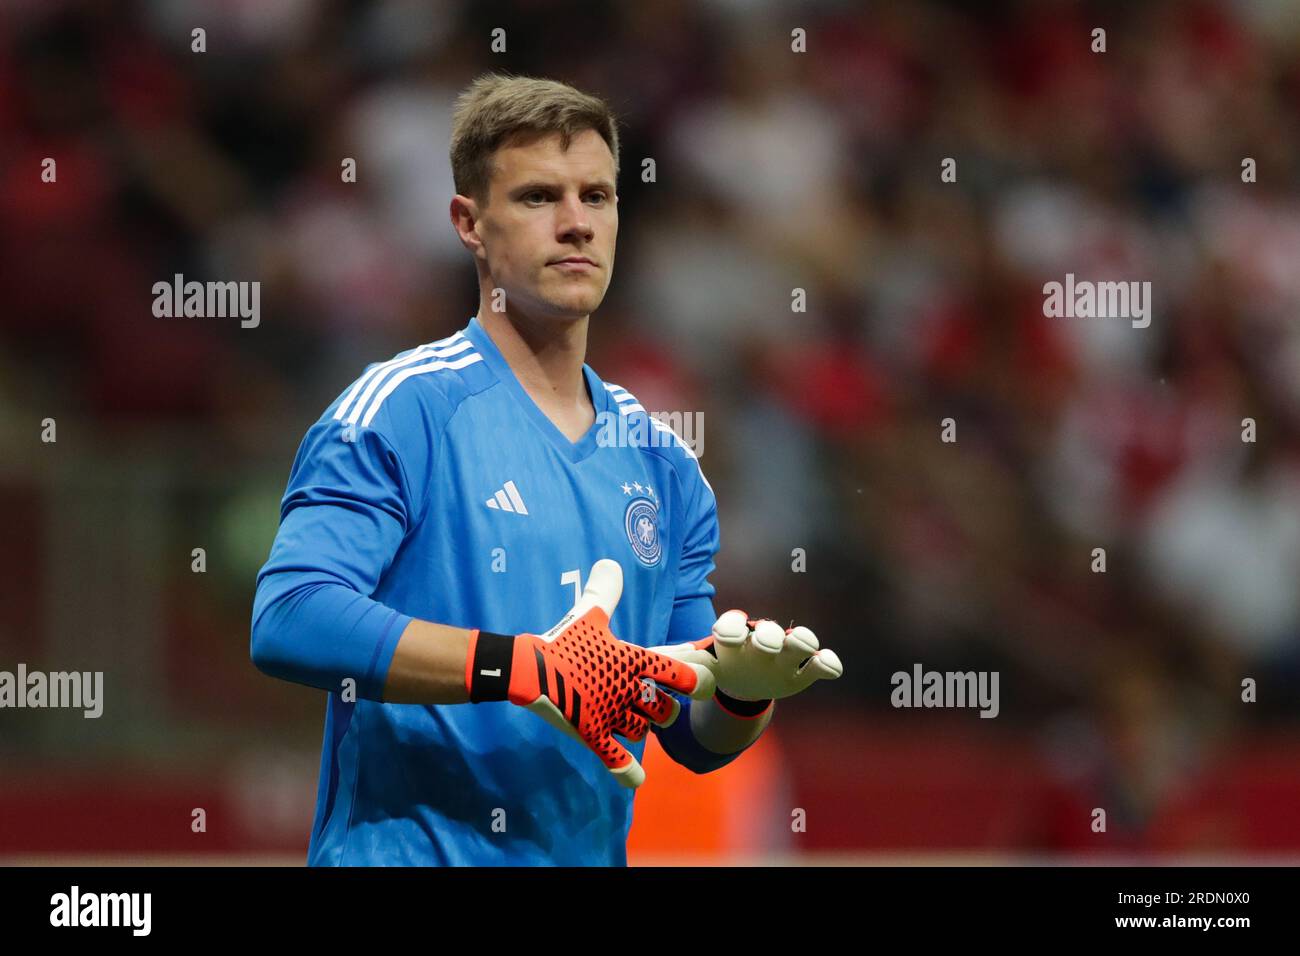 Marc-Andre ter Stegen of Germany in action during the Friendly match between Poland and Germany at PEG Narodowy. Final score: Poland 1:0 Germany. Stock Photo